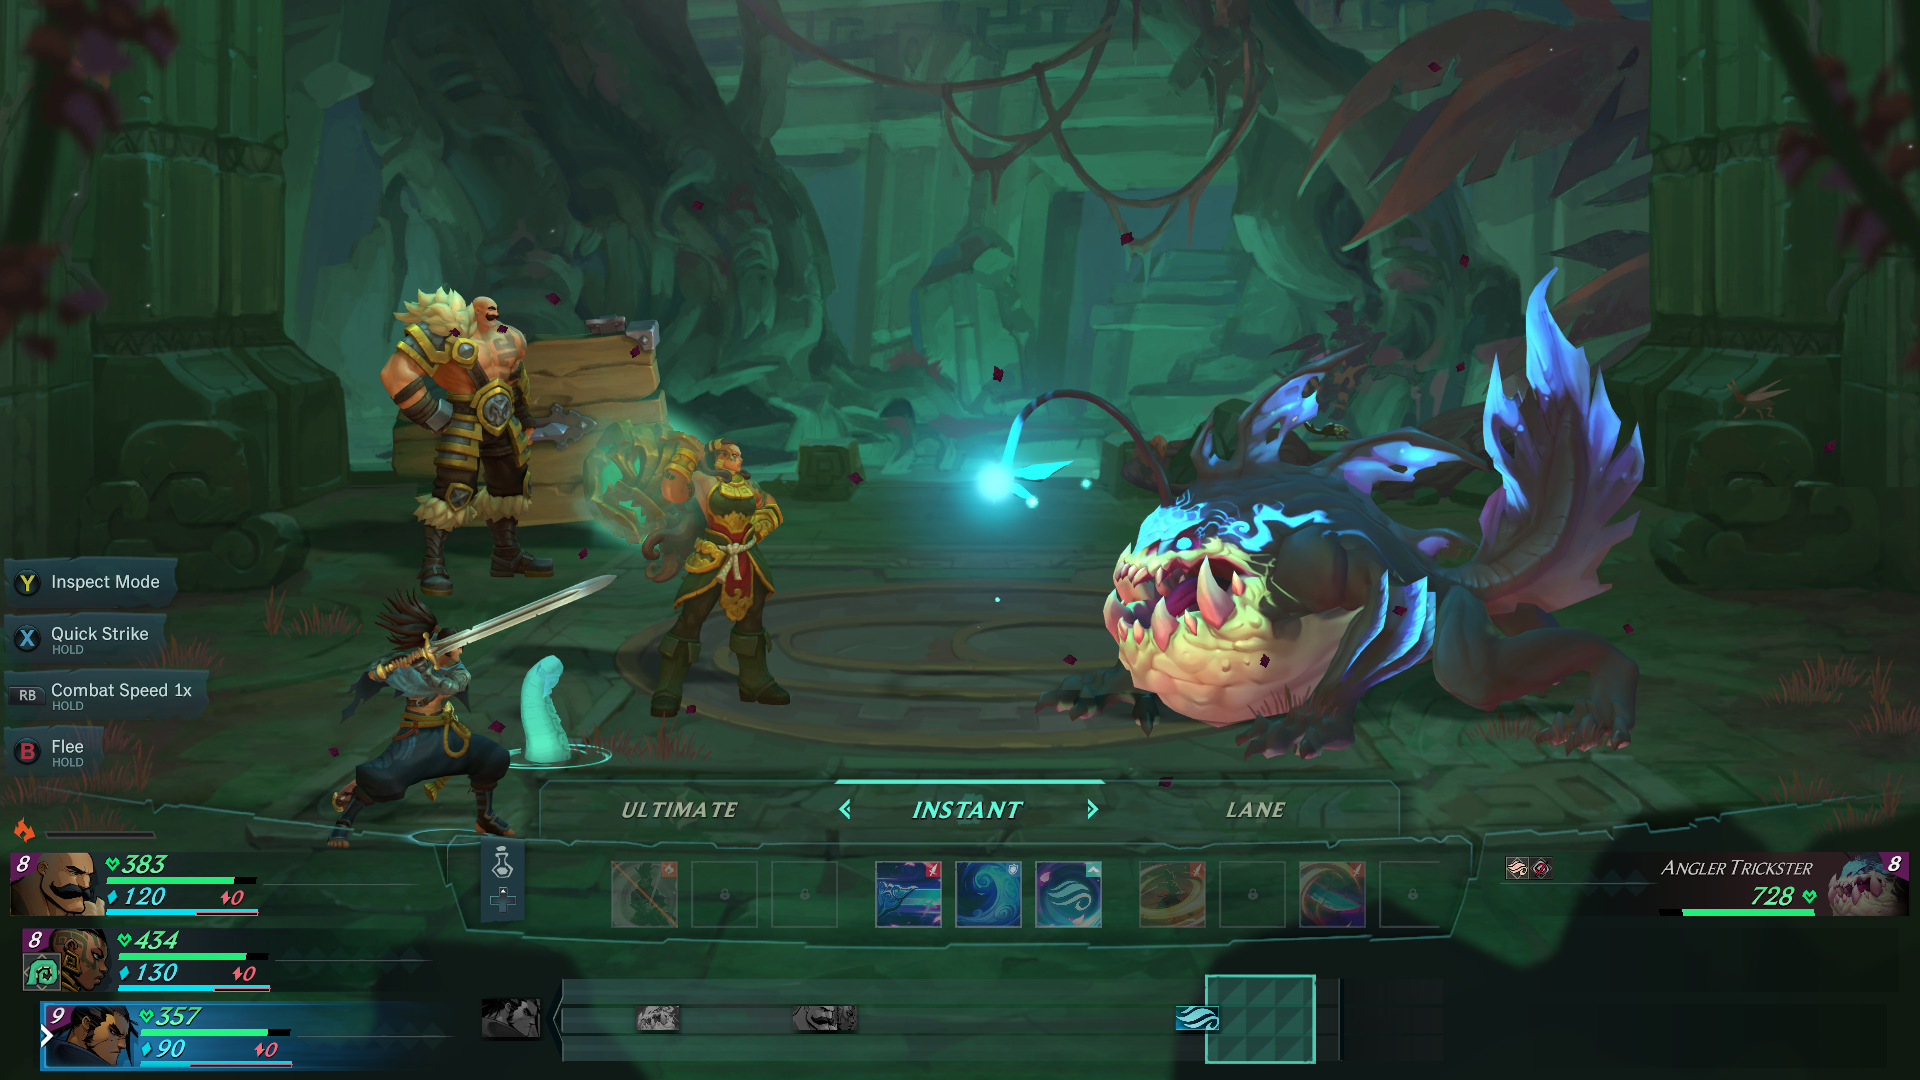 Yasuo, Braum and Illaoi fighting a Trickster Angler, a shapeshifting enemy